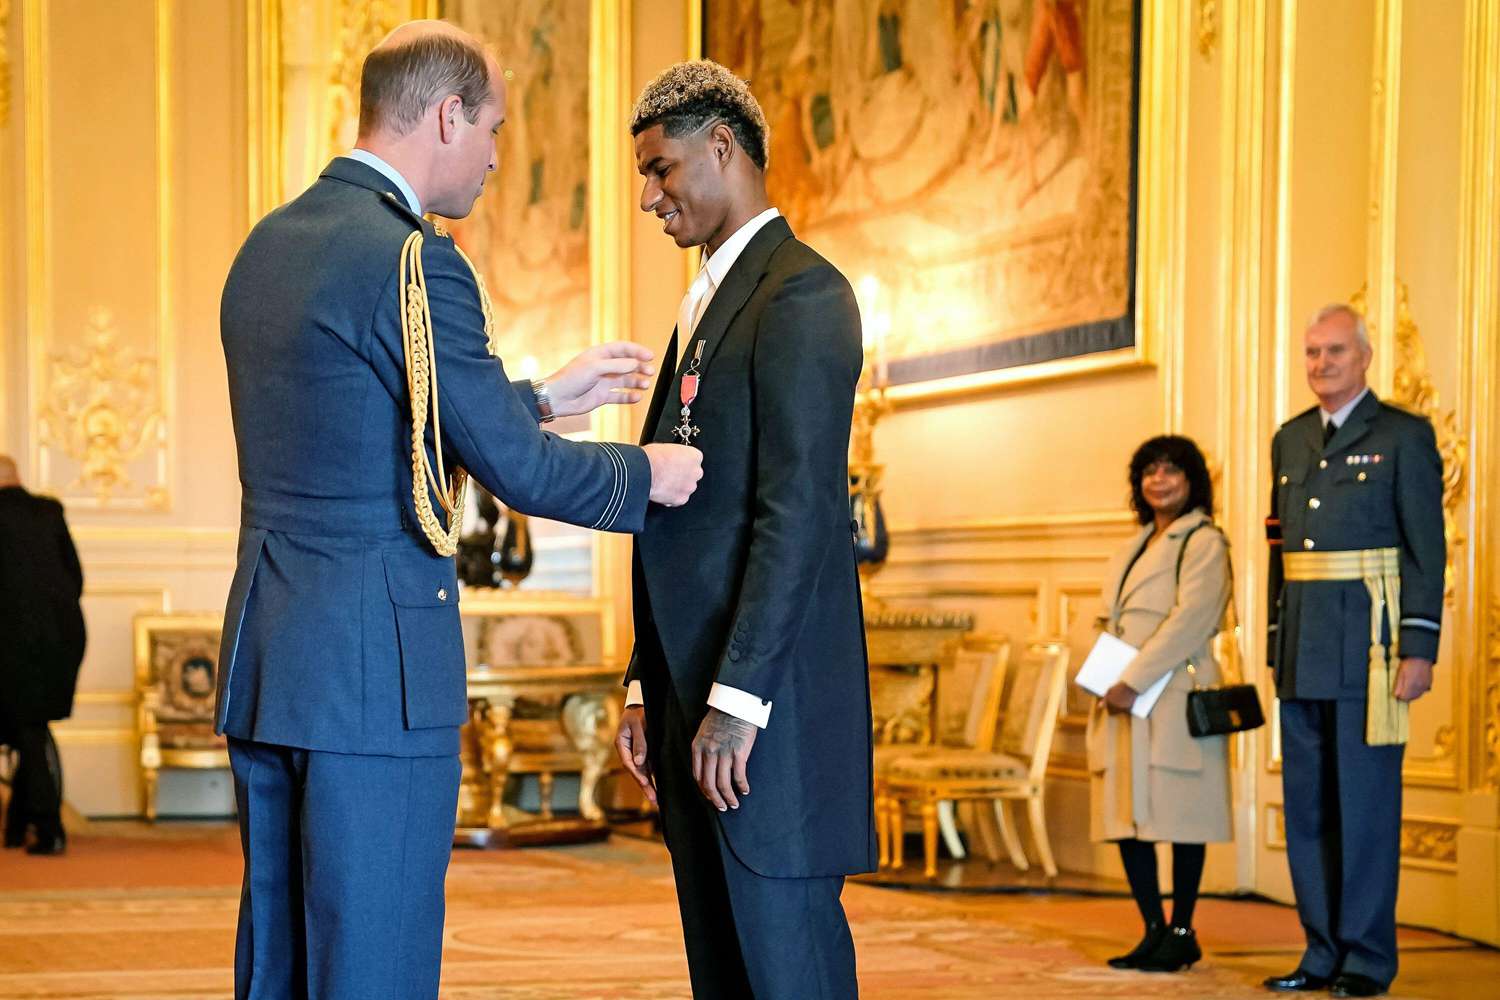 Footballer Marcus Rashford is made an MBE (Member of the Order of the British Empire) by the Duke of Cambridge